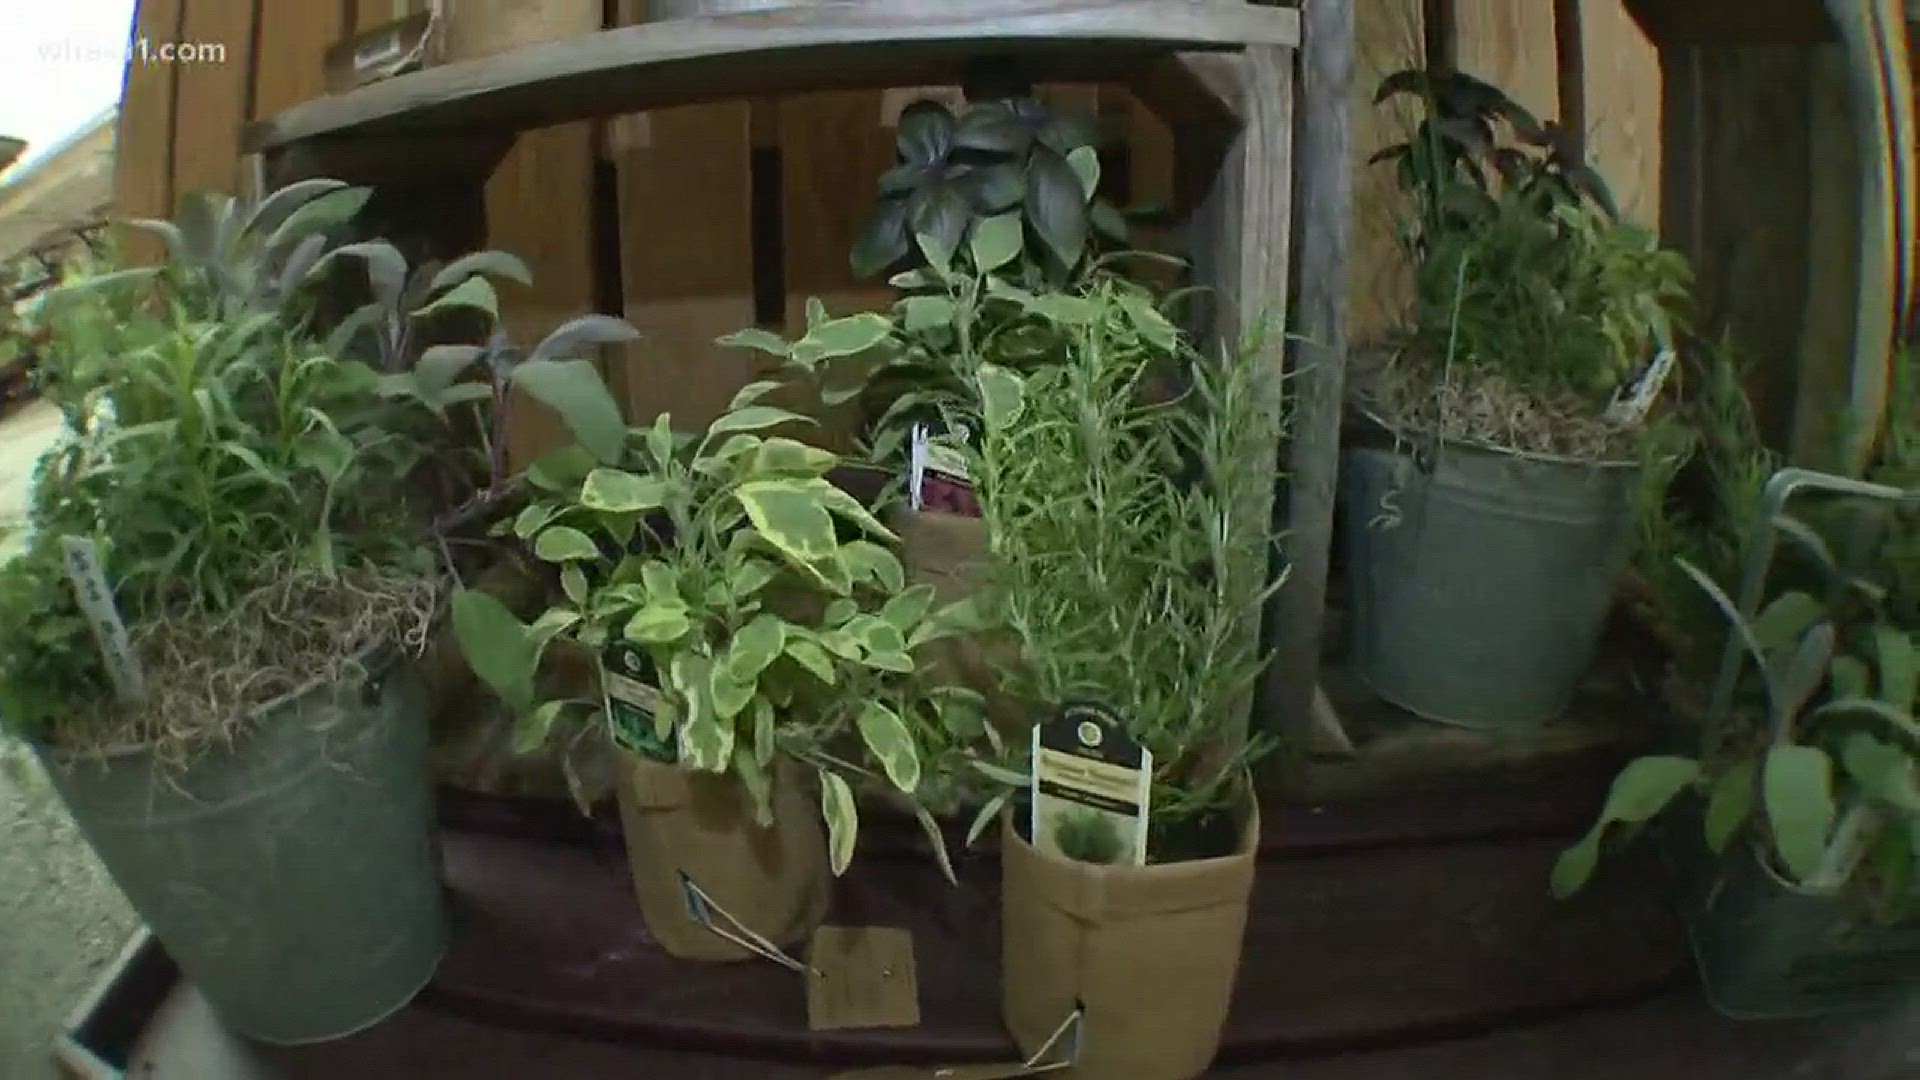 How to plant and use herbs with Jeff Wallitsch at Wallitsch Garden Center